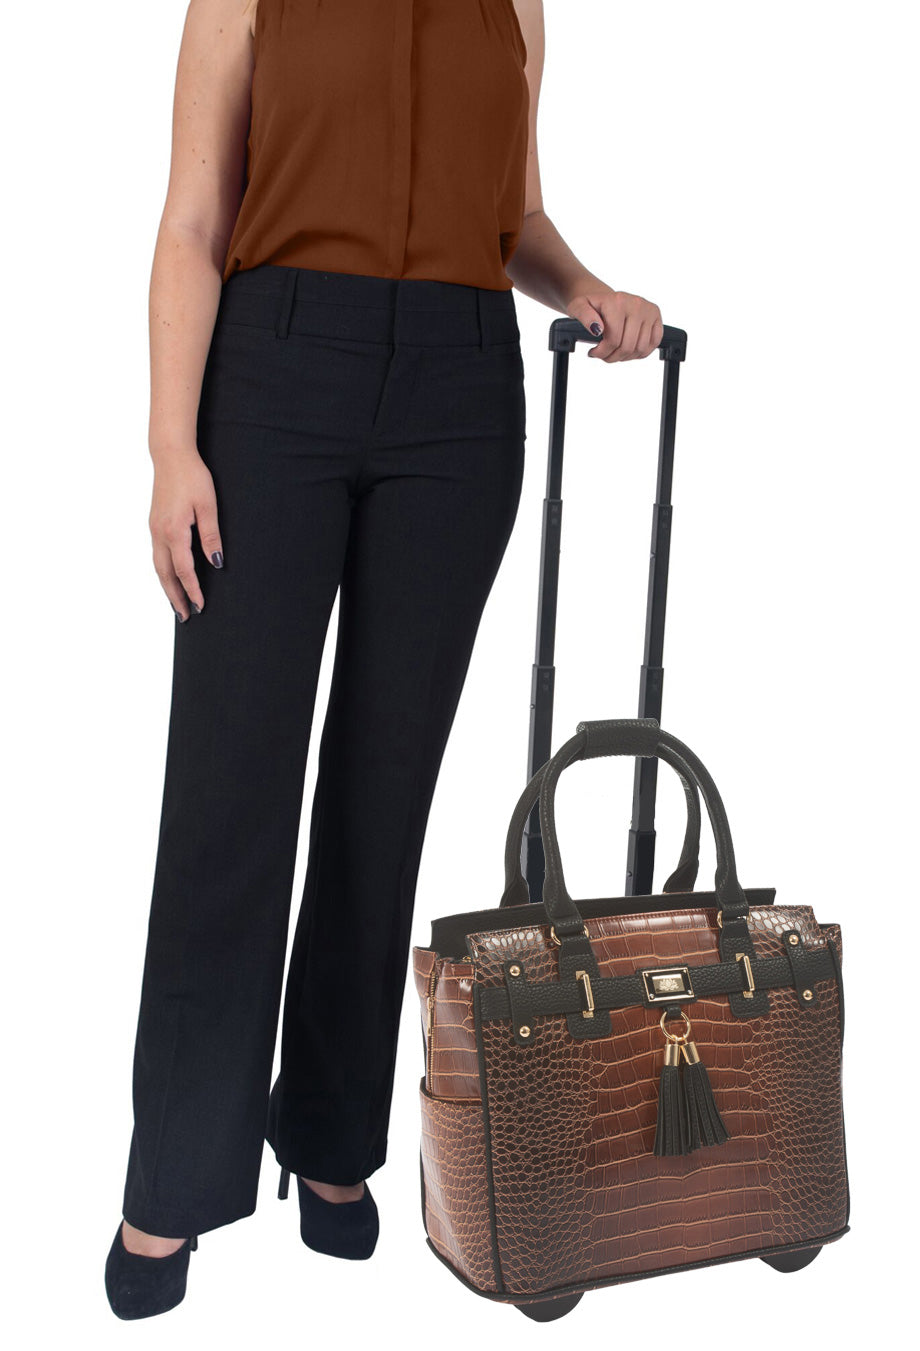 THE MANHATTAN Rolling Laptop Bag, Rolling Briefcase for Women, Overnight Bag